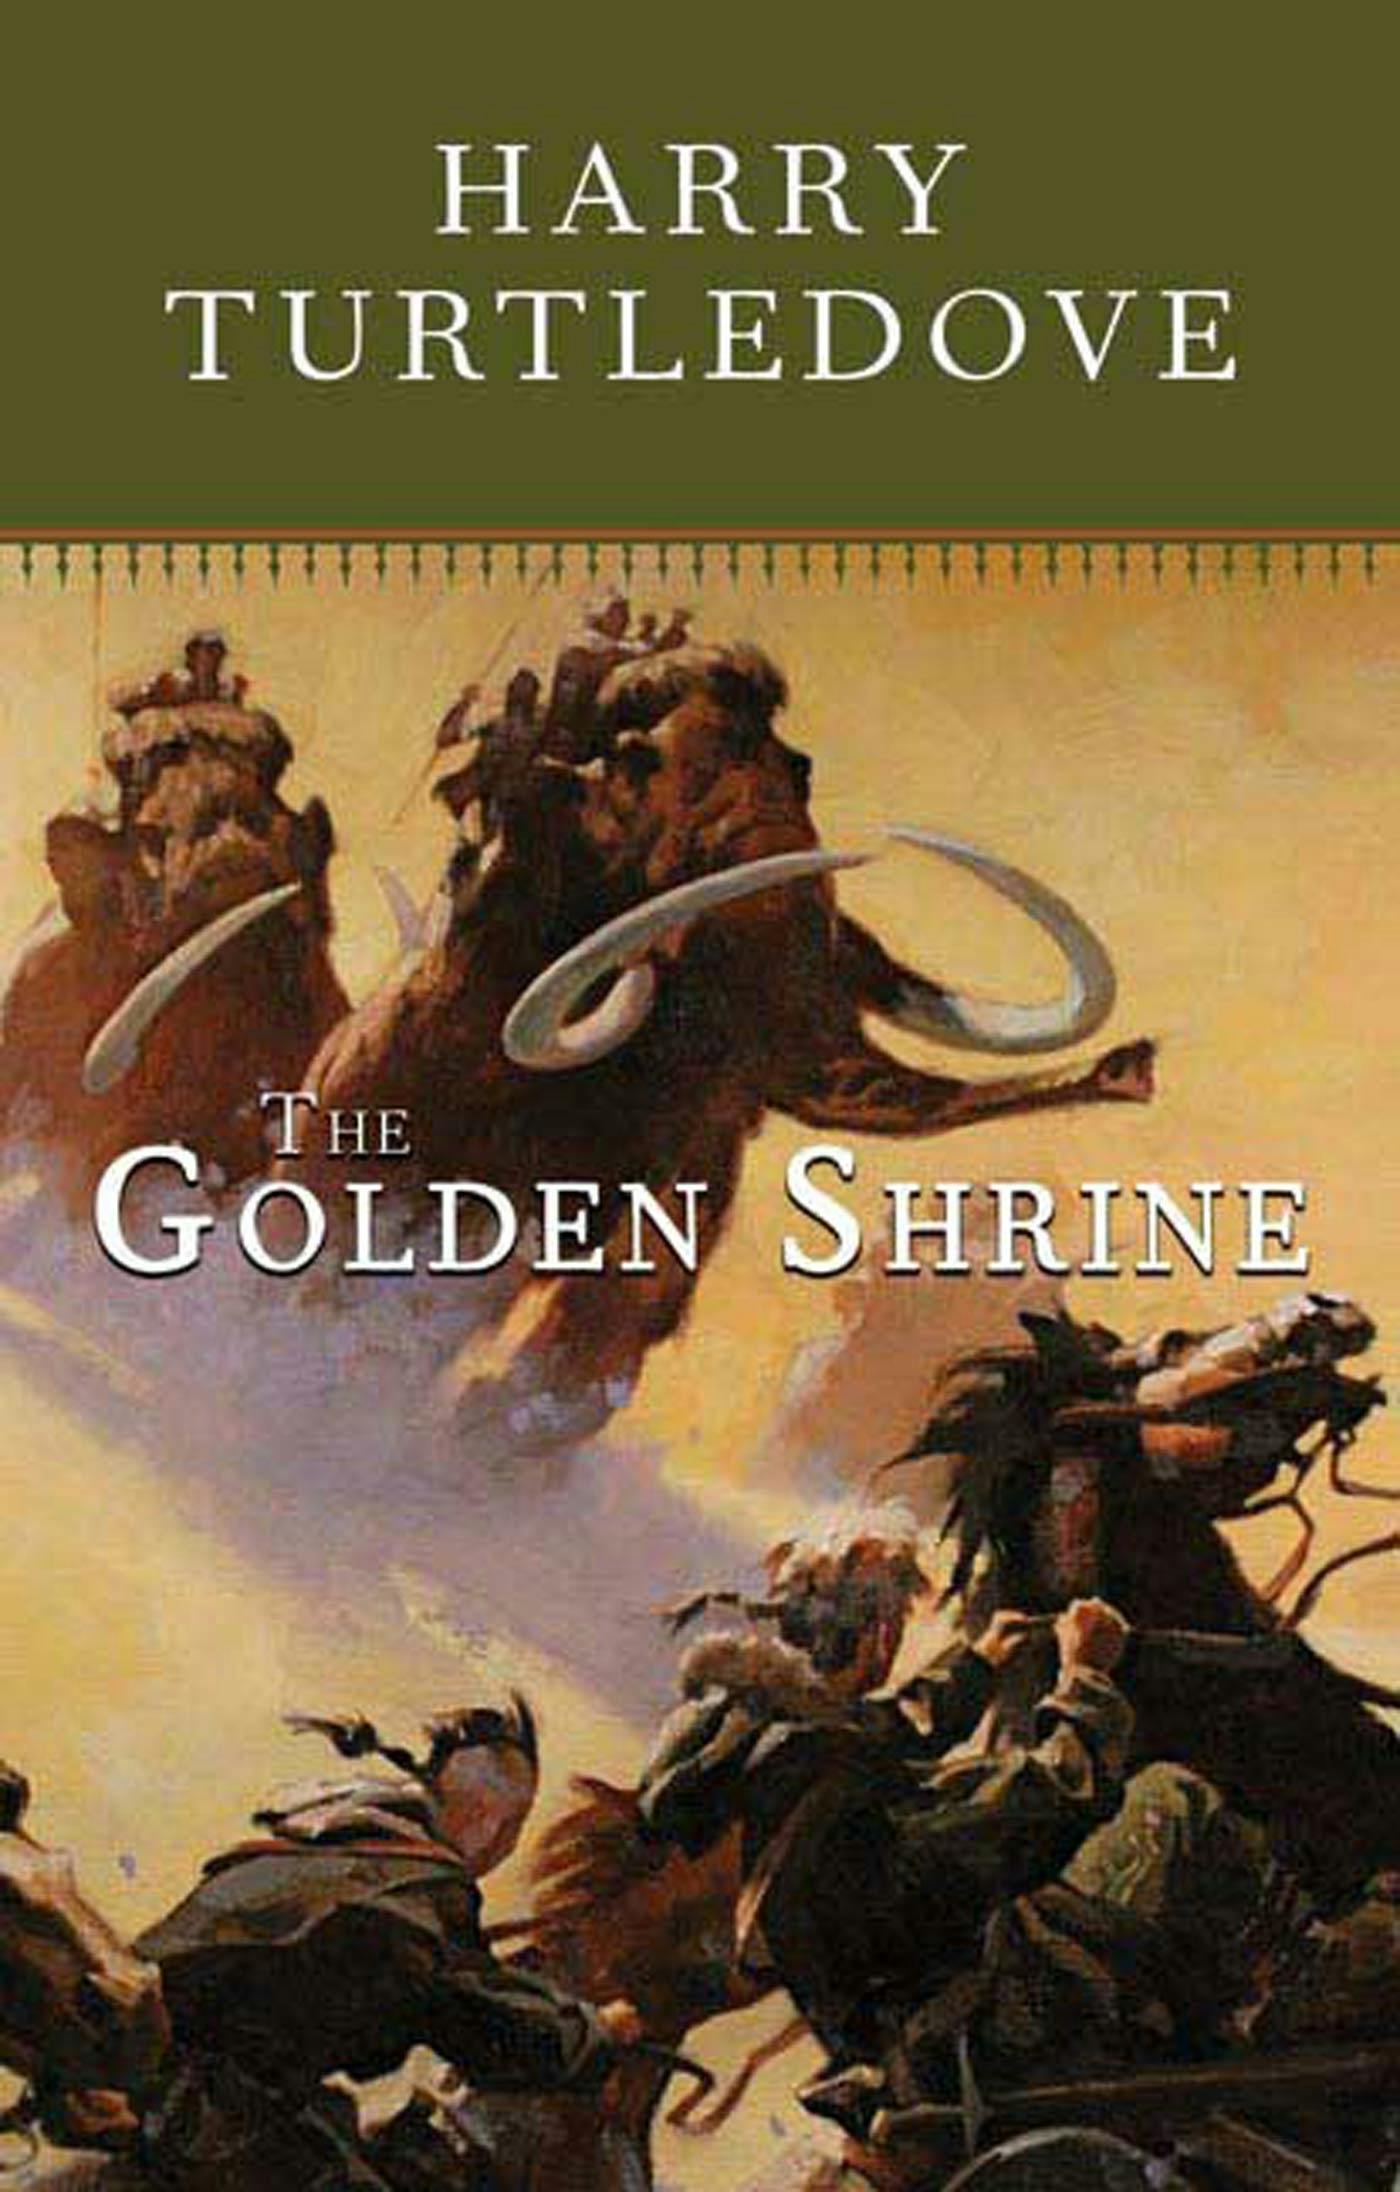 Cover for the book titled as: The Golden Shrine